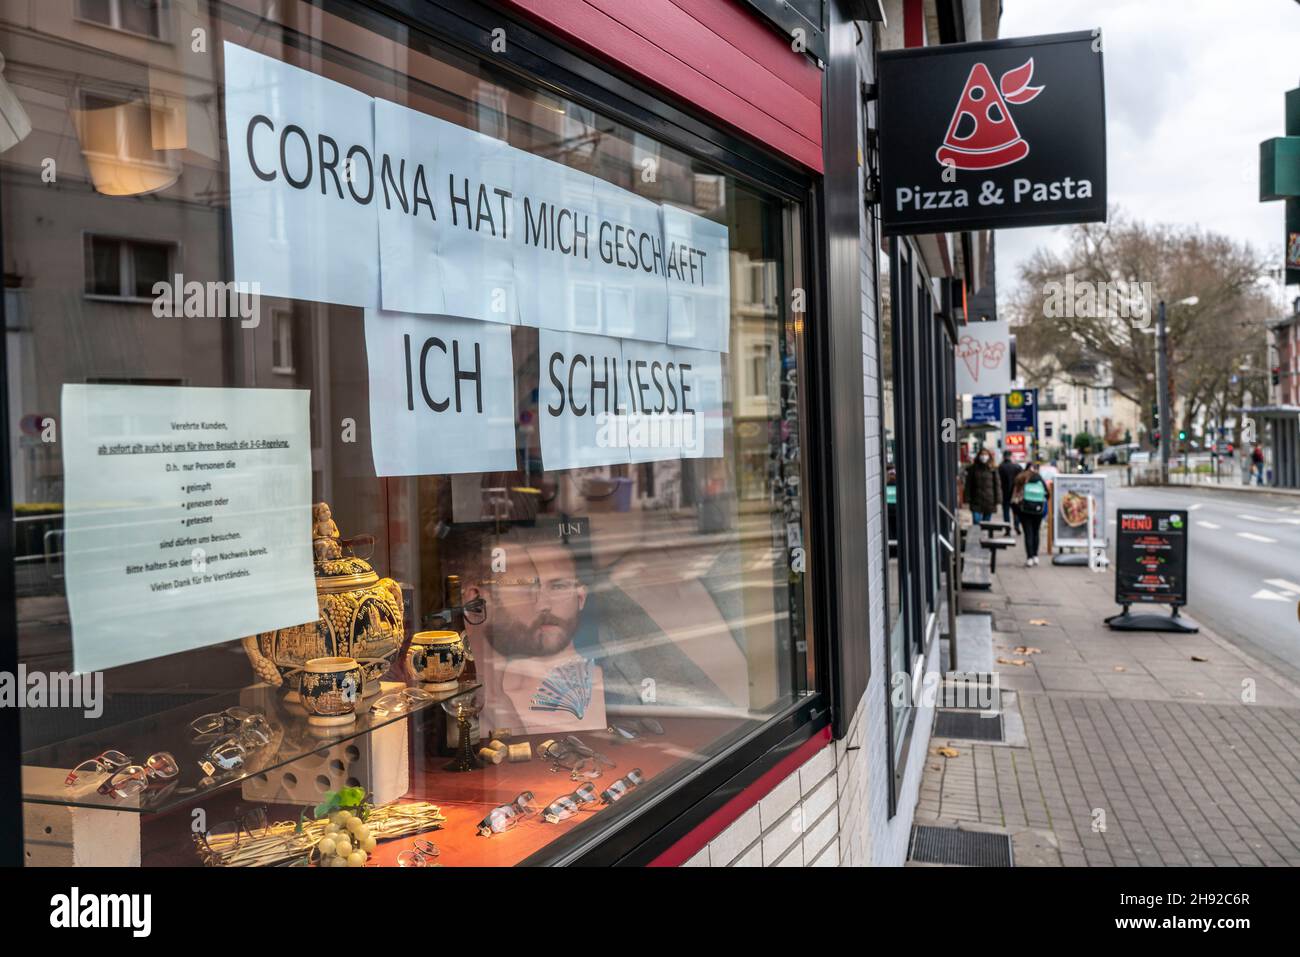 Business closure due to the economic consequences of the Corona crisis, the optician Rode, in the Südviertel in Essen, closes after eleven years, sale Stock Photo